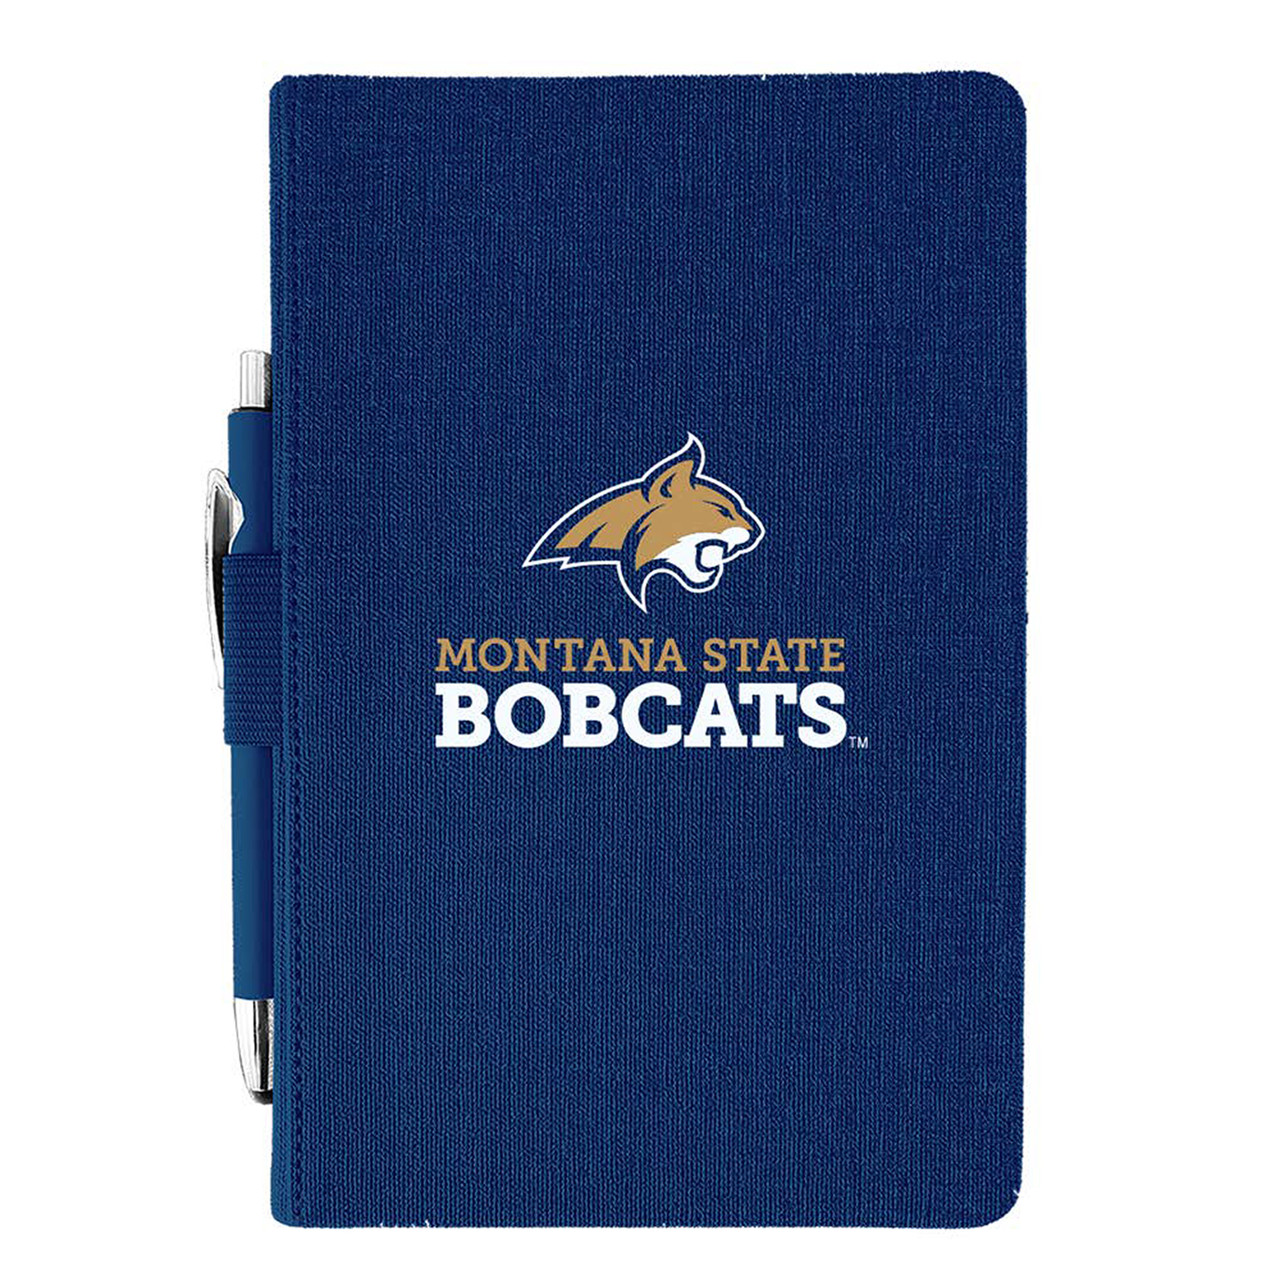 Montana State Bobcats Journal with Pen